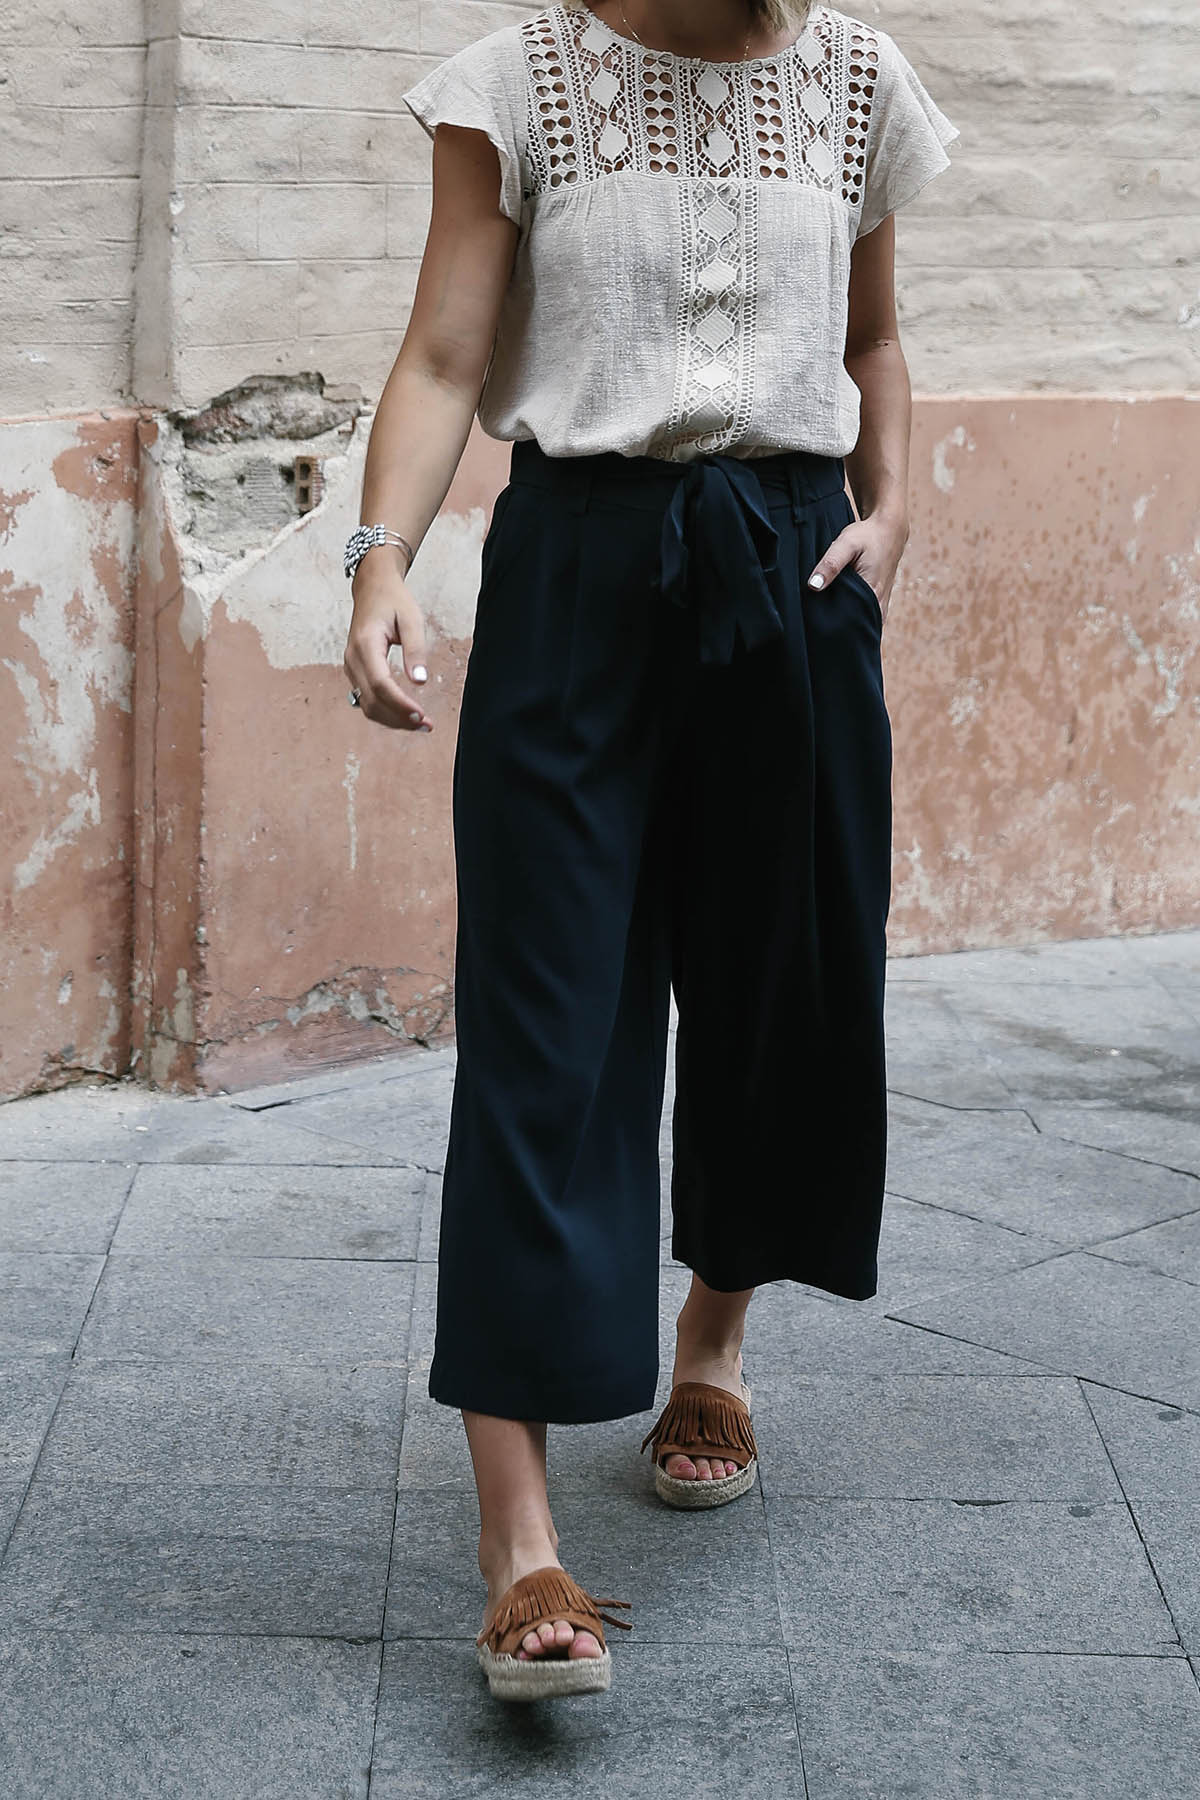 navy culottes outfit with espadrilles and crochet top